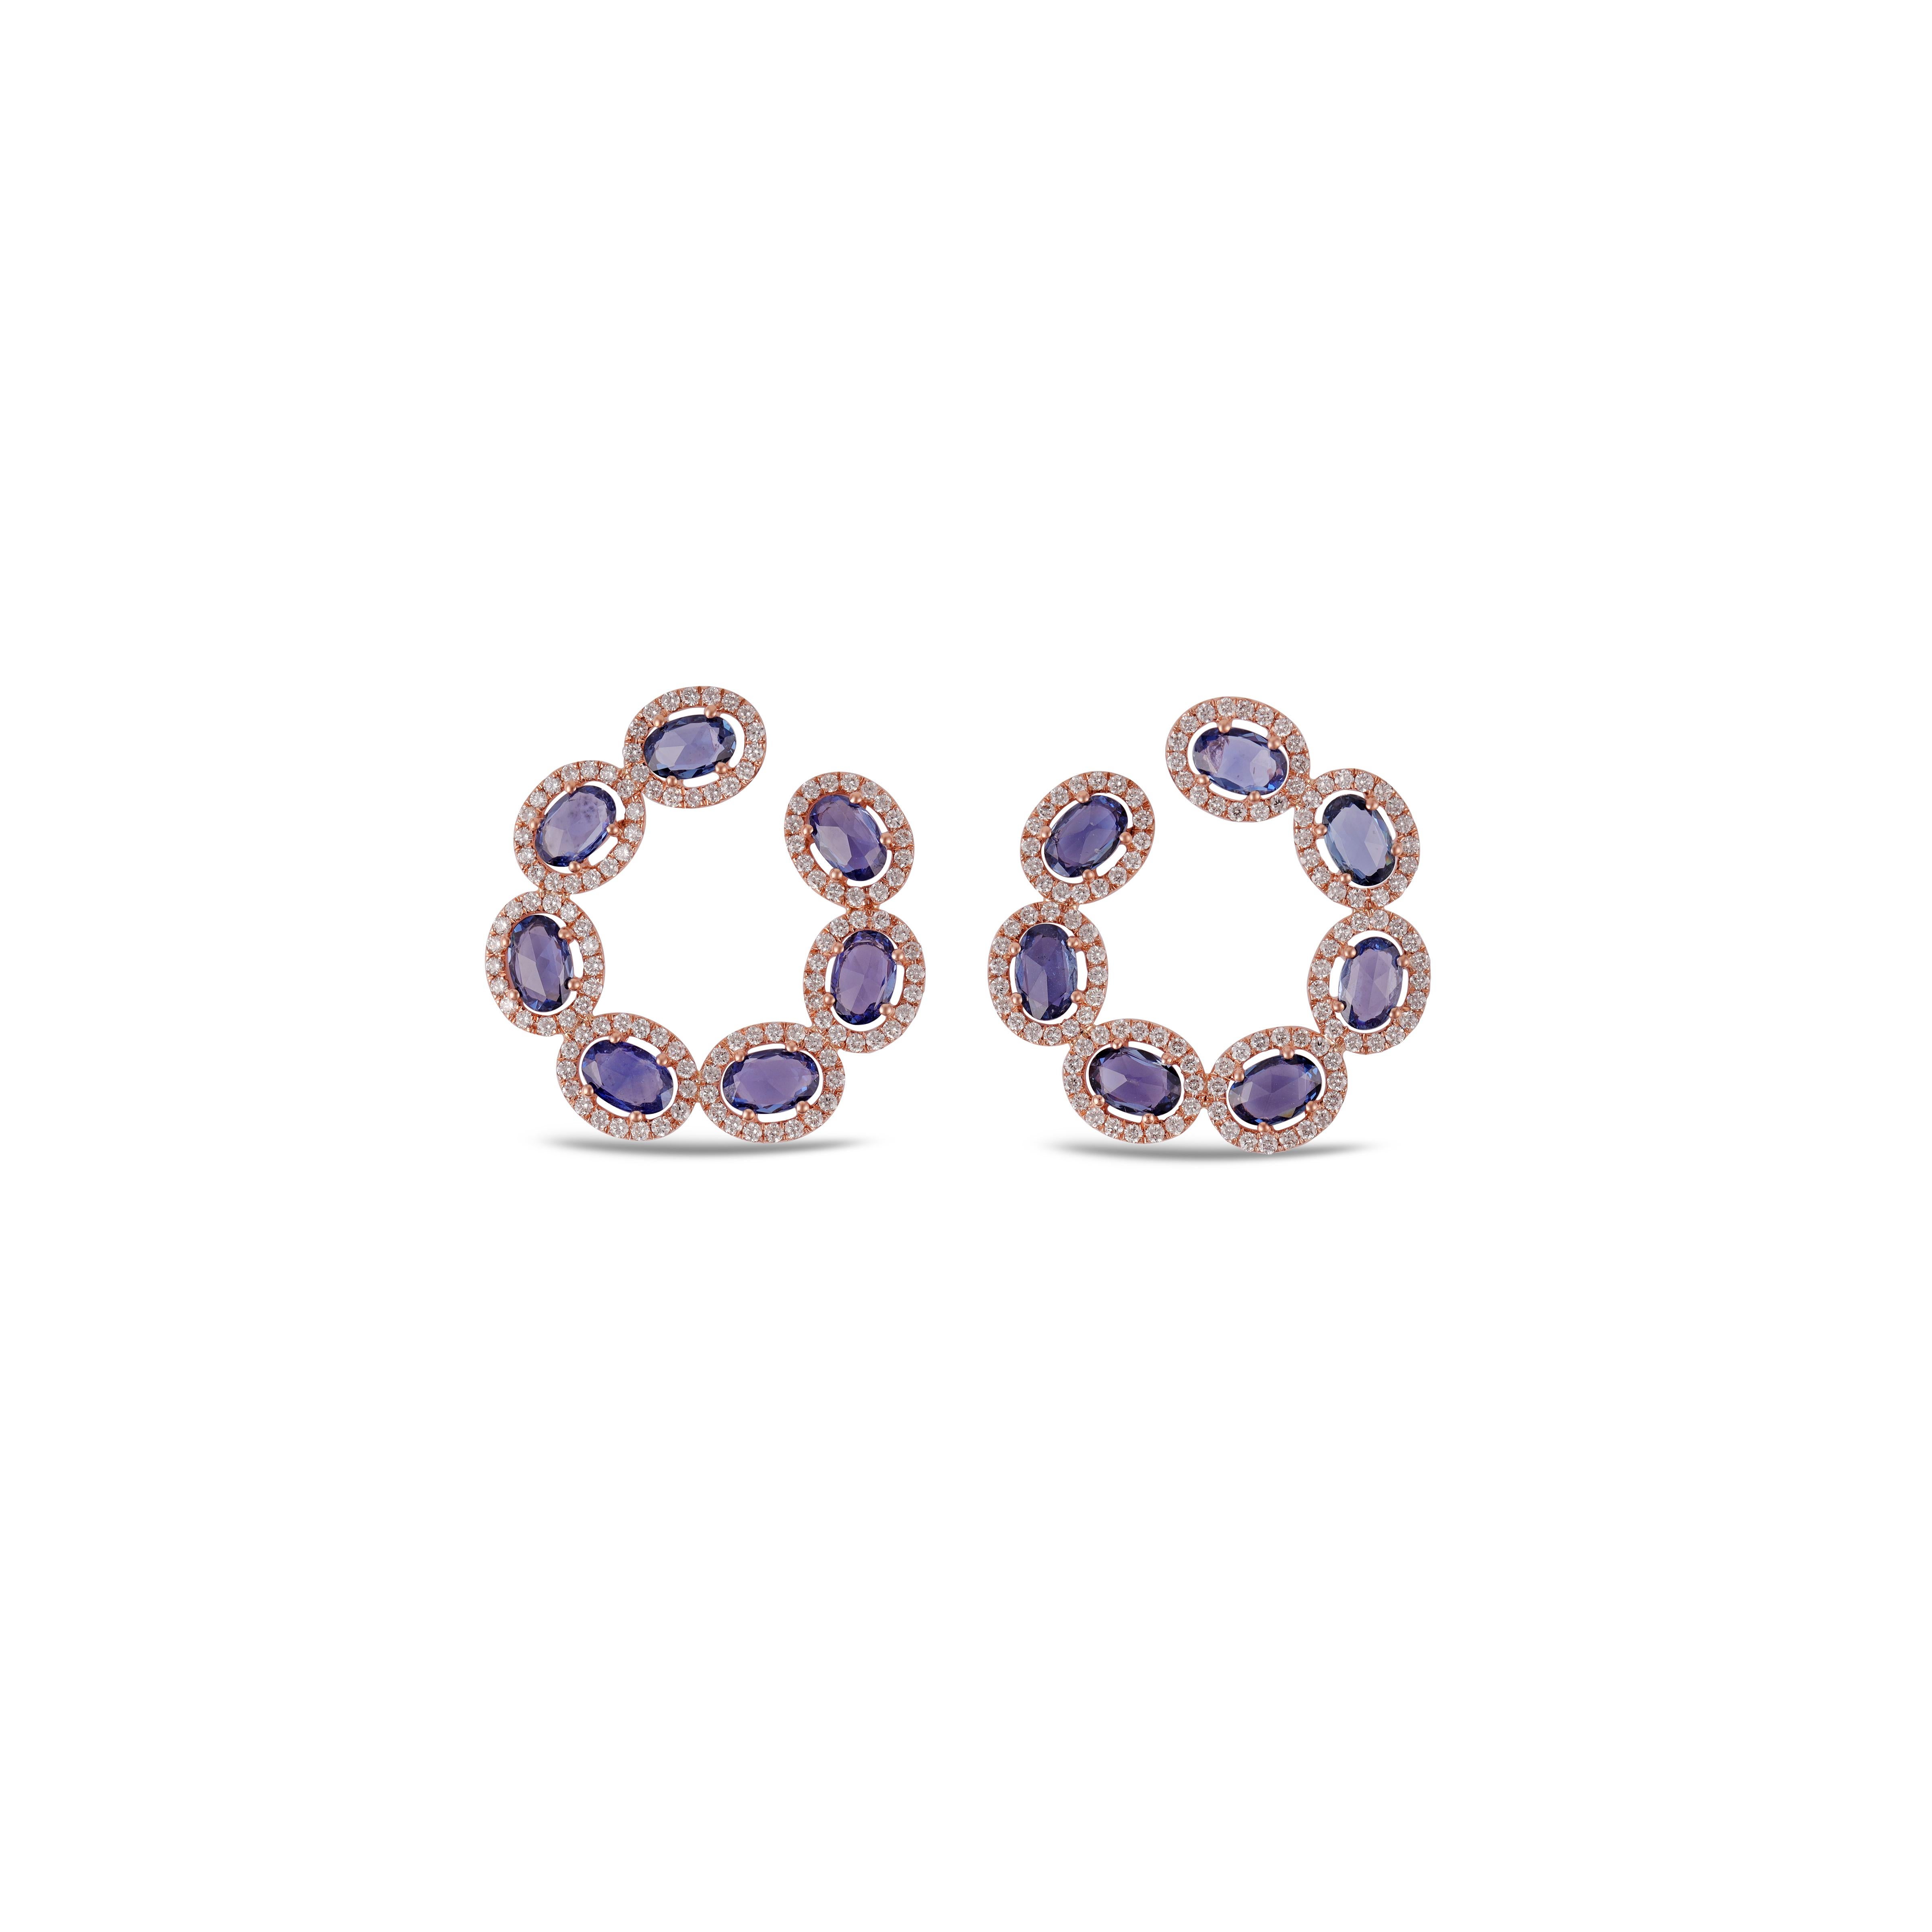 Rose Cut 6.25 Carat  Blue Sapphire Earrings in Rose Gold with Diamonds.  For Sale